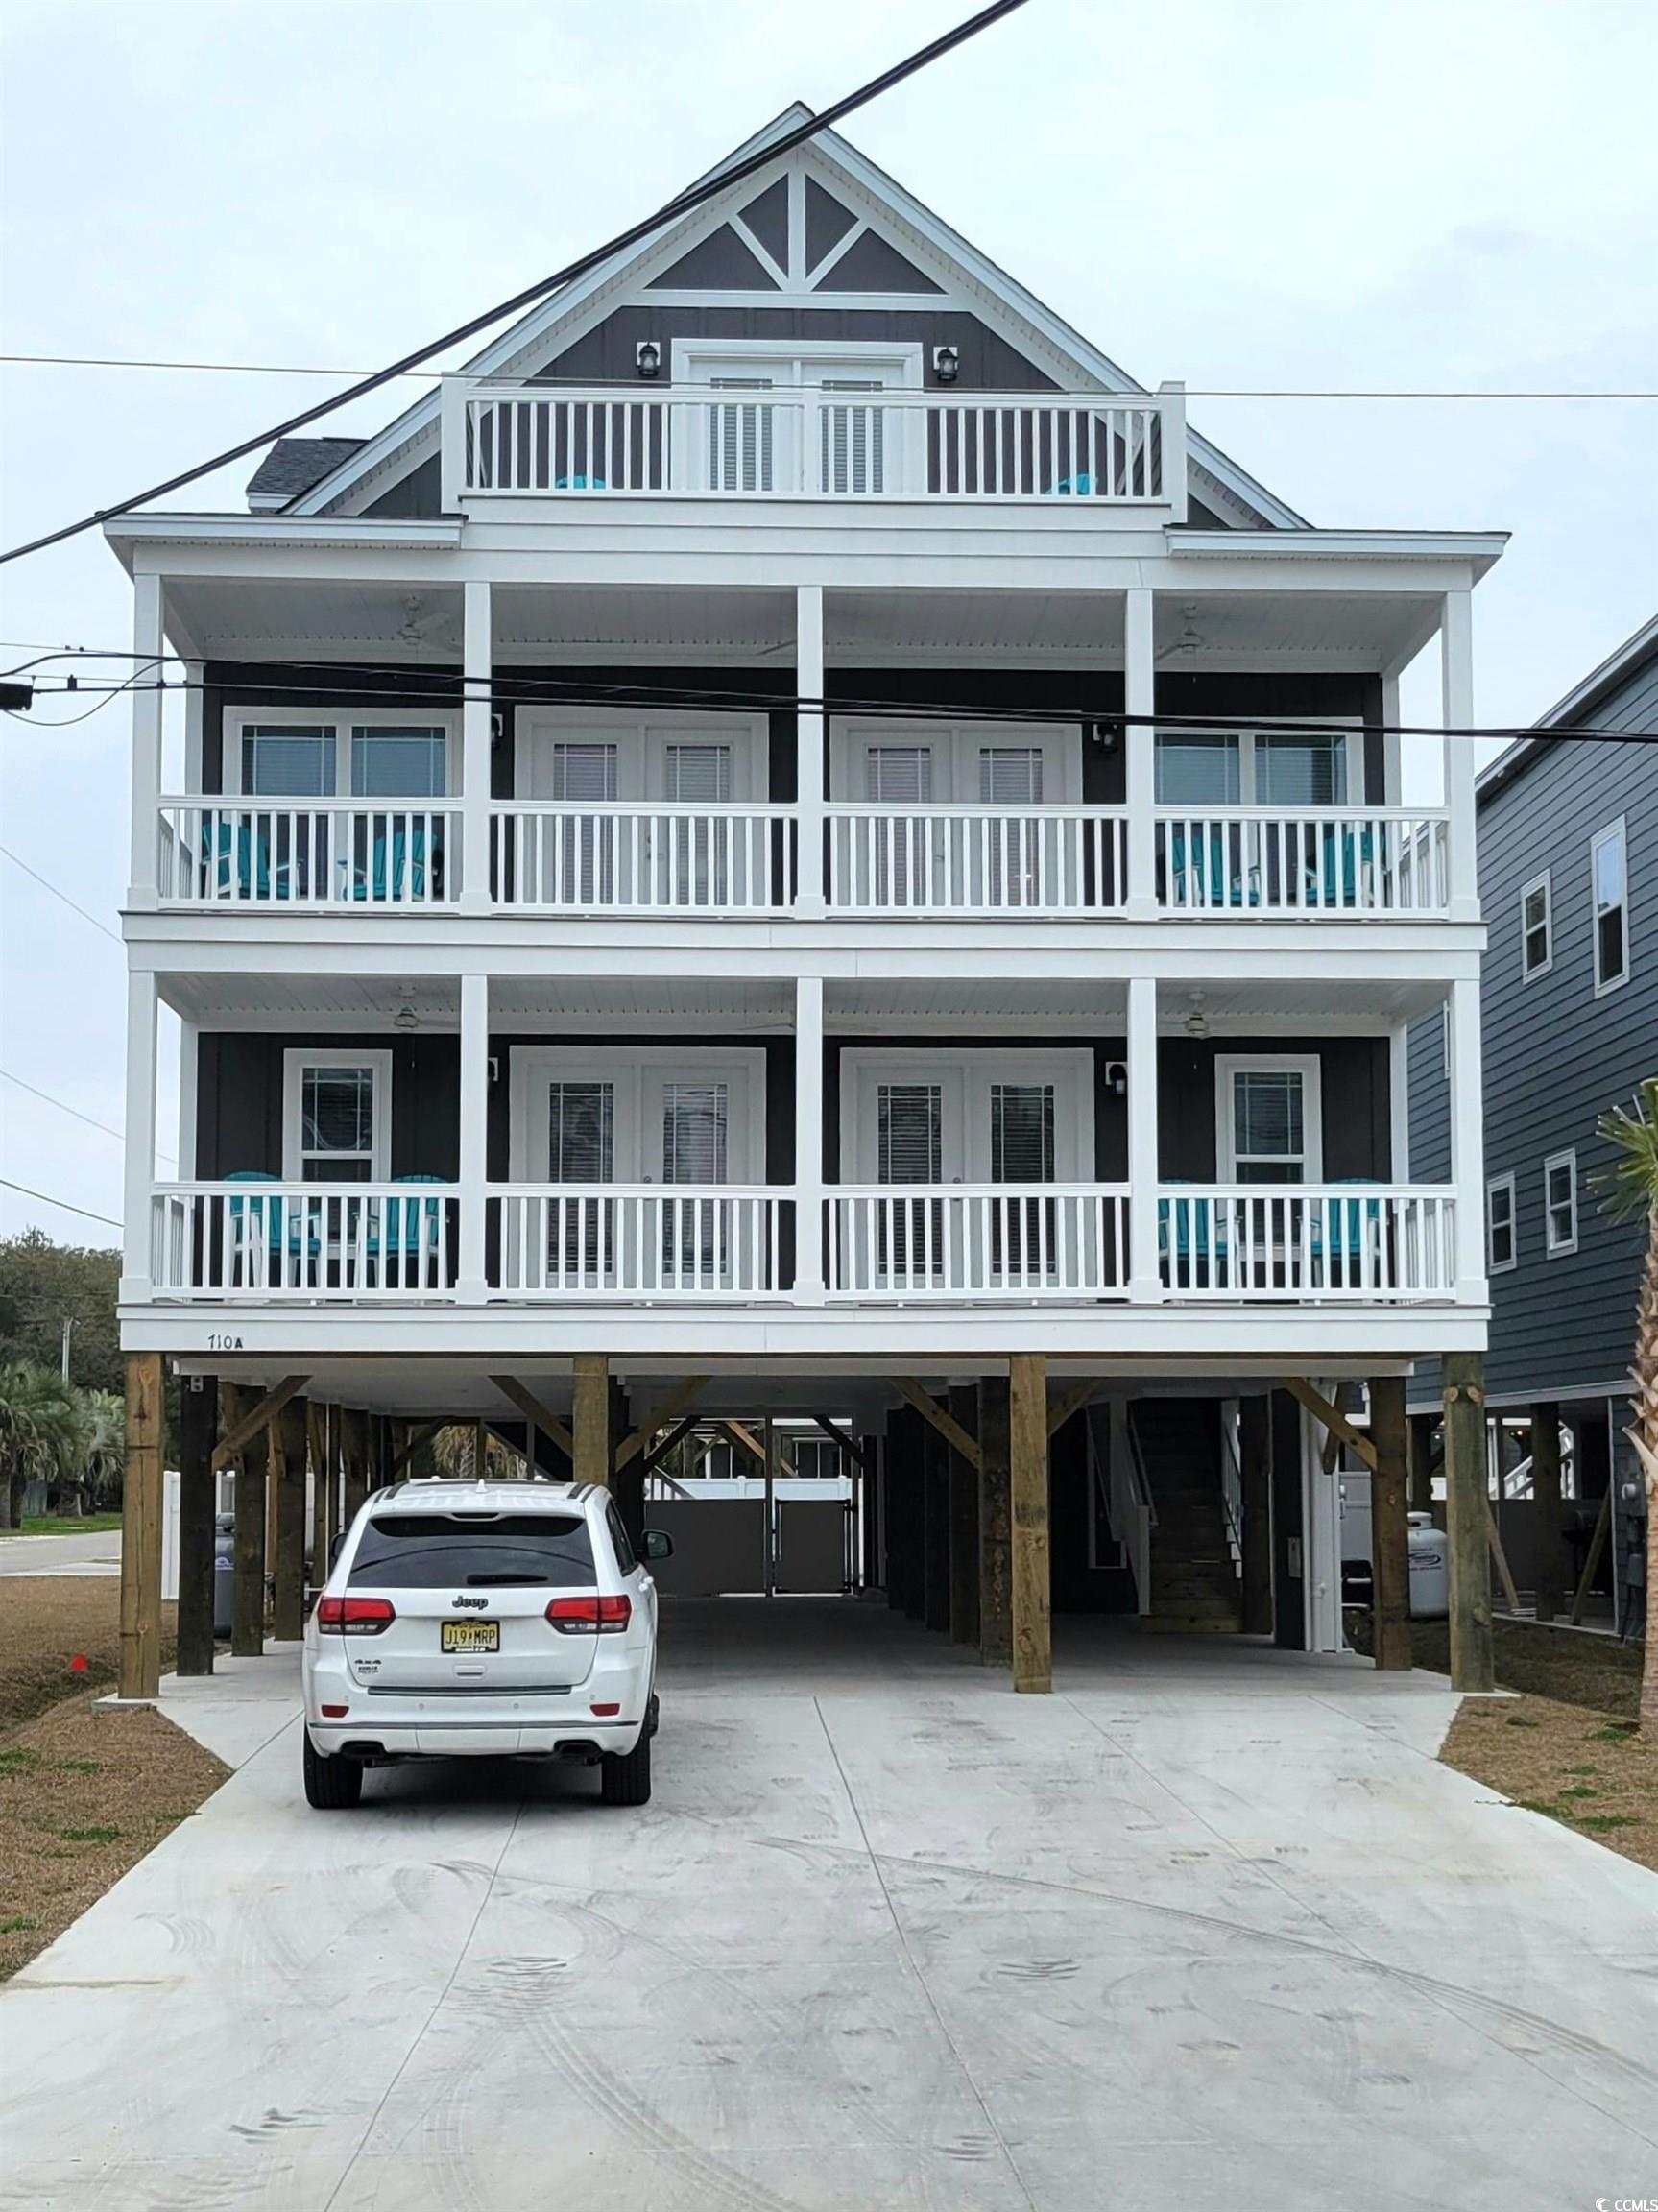 29a Surfside Beach East Of 17 & North Of Surfside Real Estate Listings Main Image